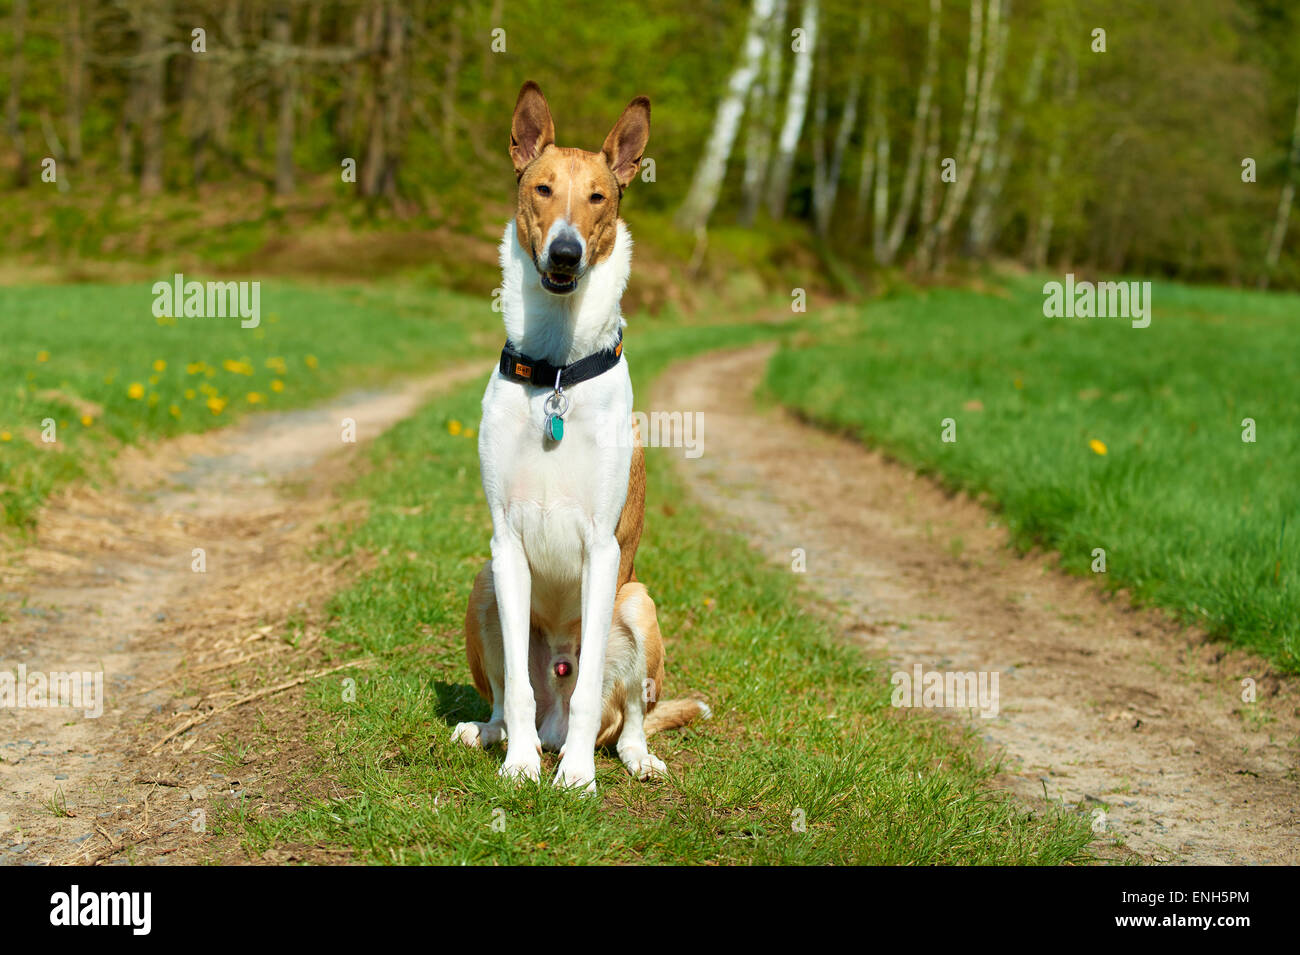 Short-Haired Smooth Collie dog on rural road, summer Stock Photo